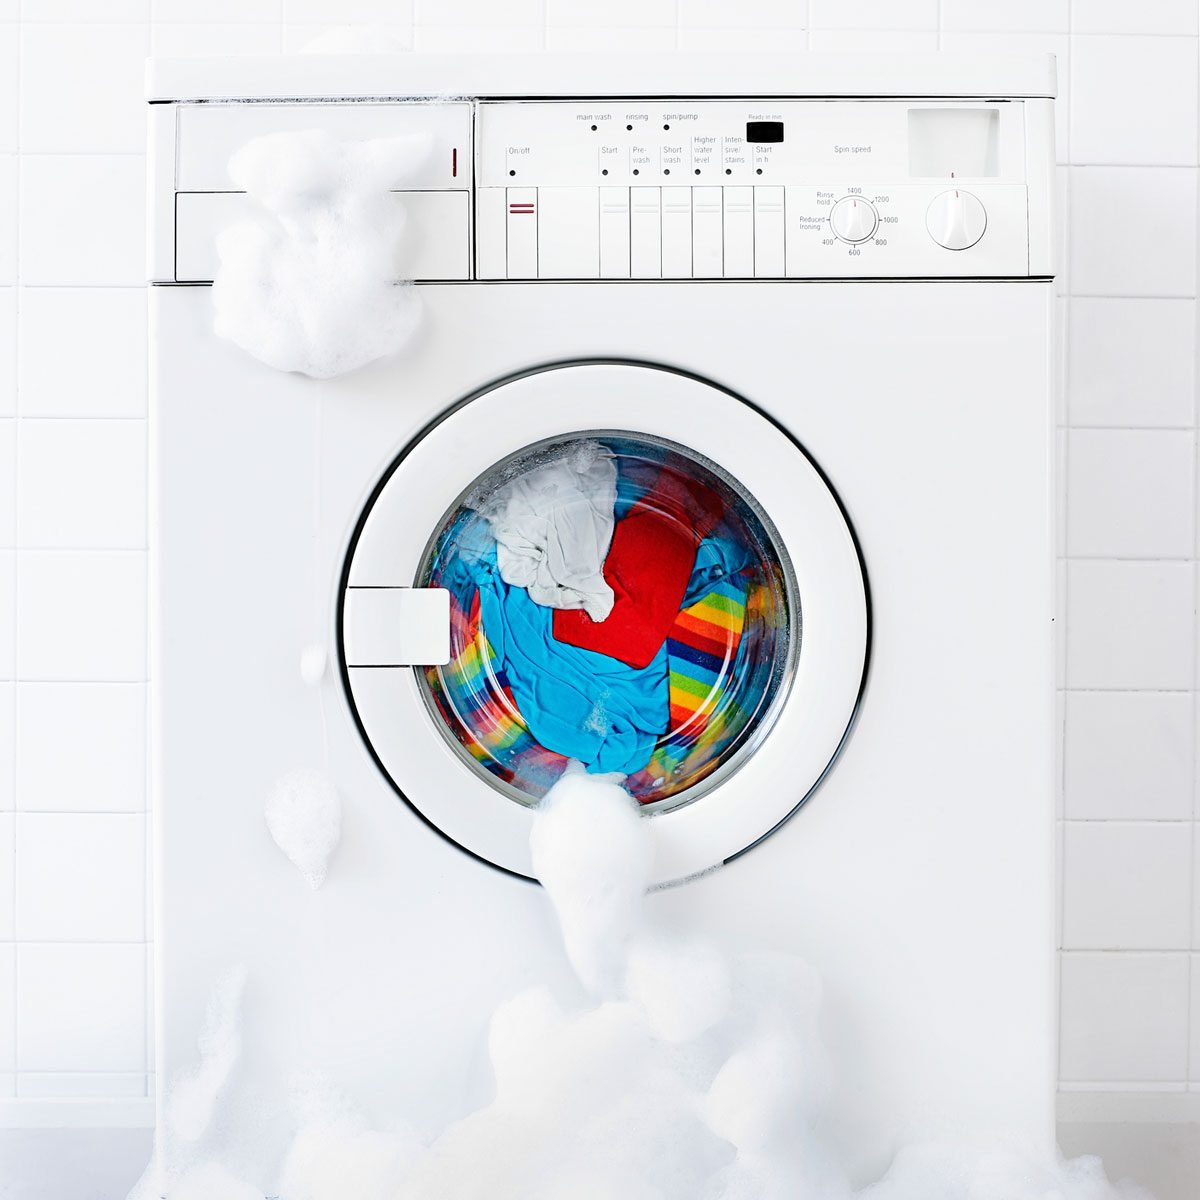 10 Laundry Room Problems You'll Regret Ignoring